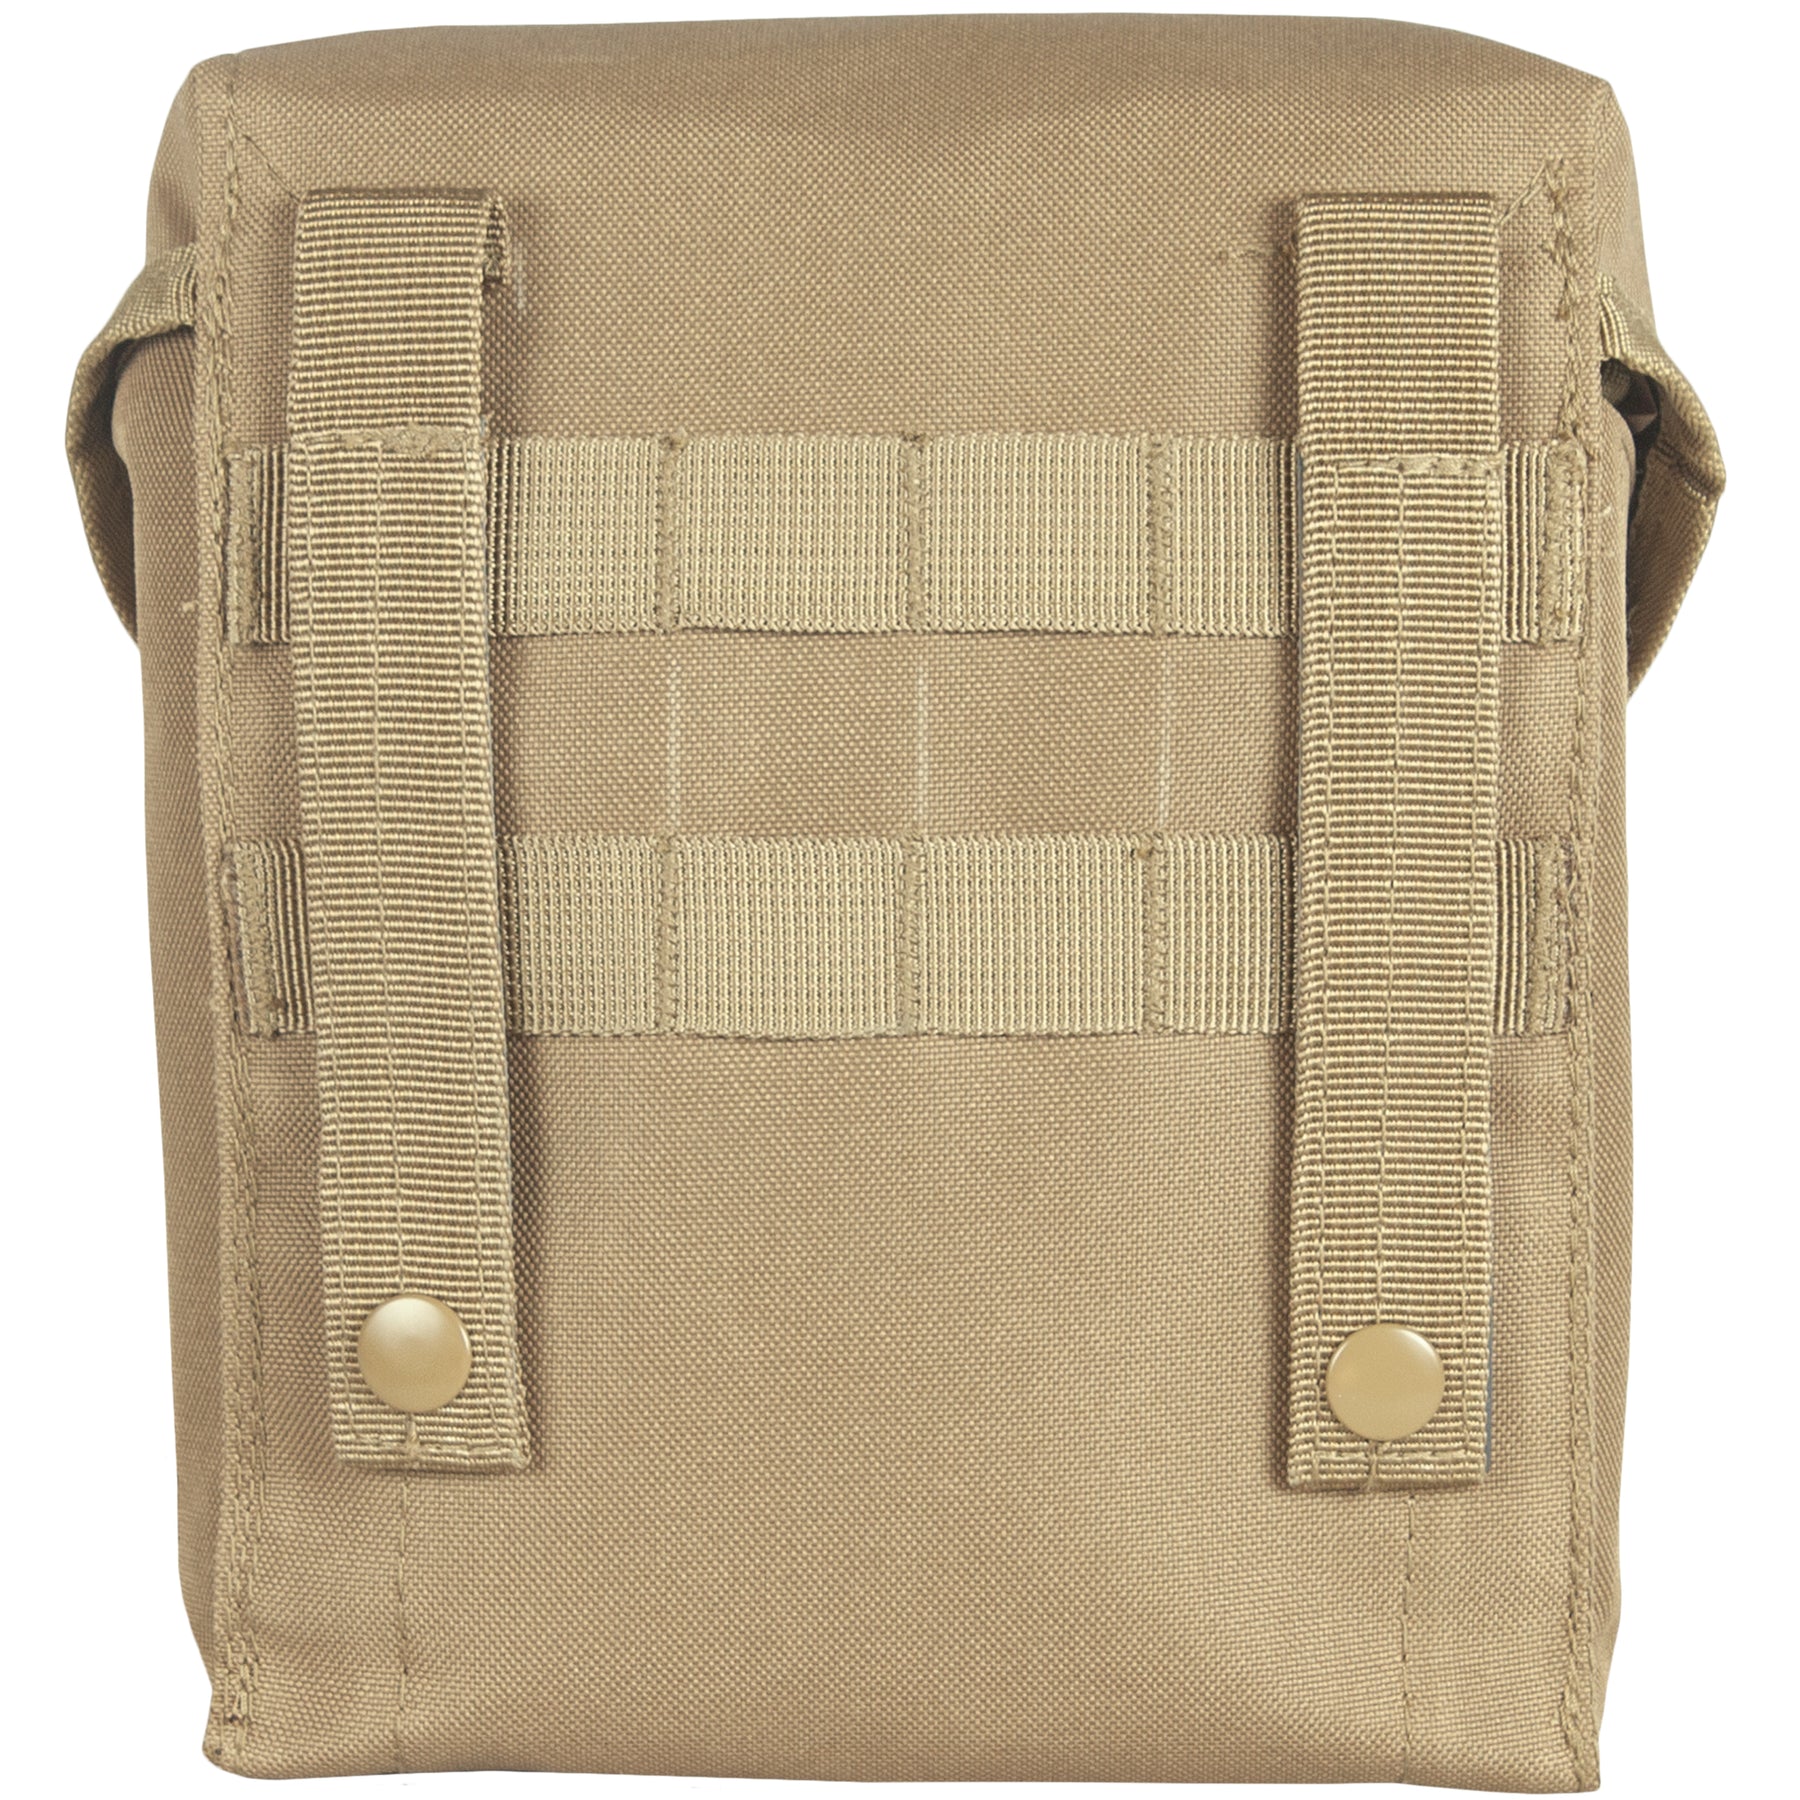 Back of S.A.W. Pouch. 